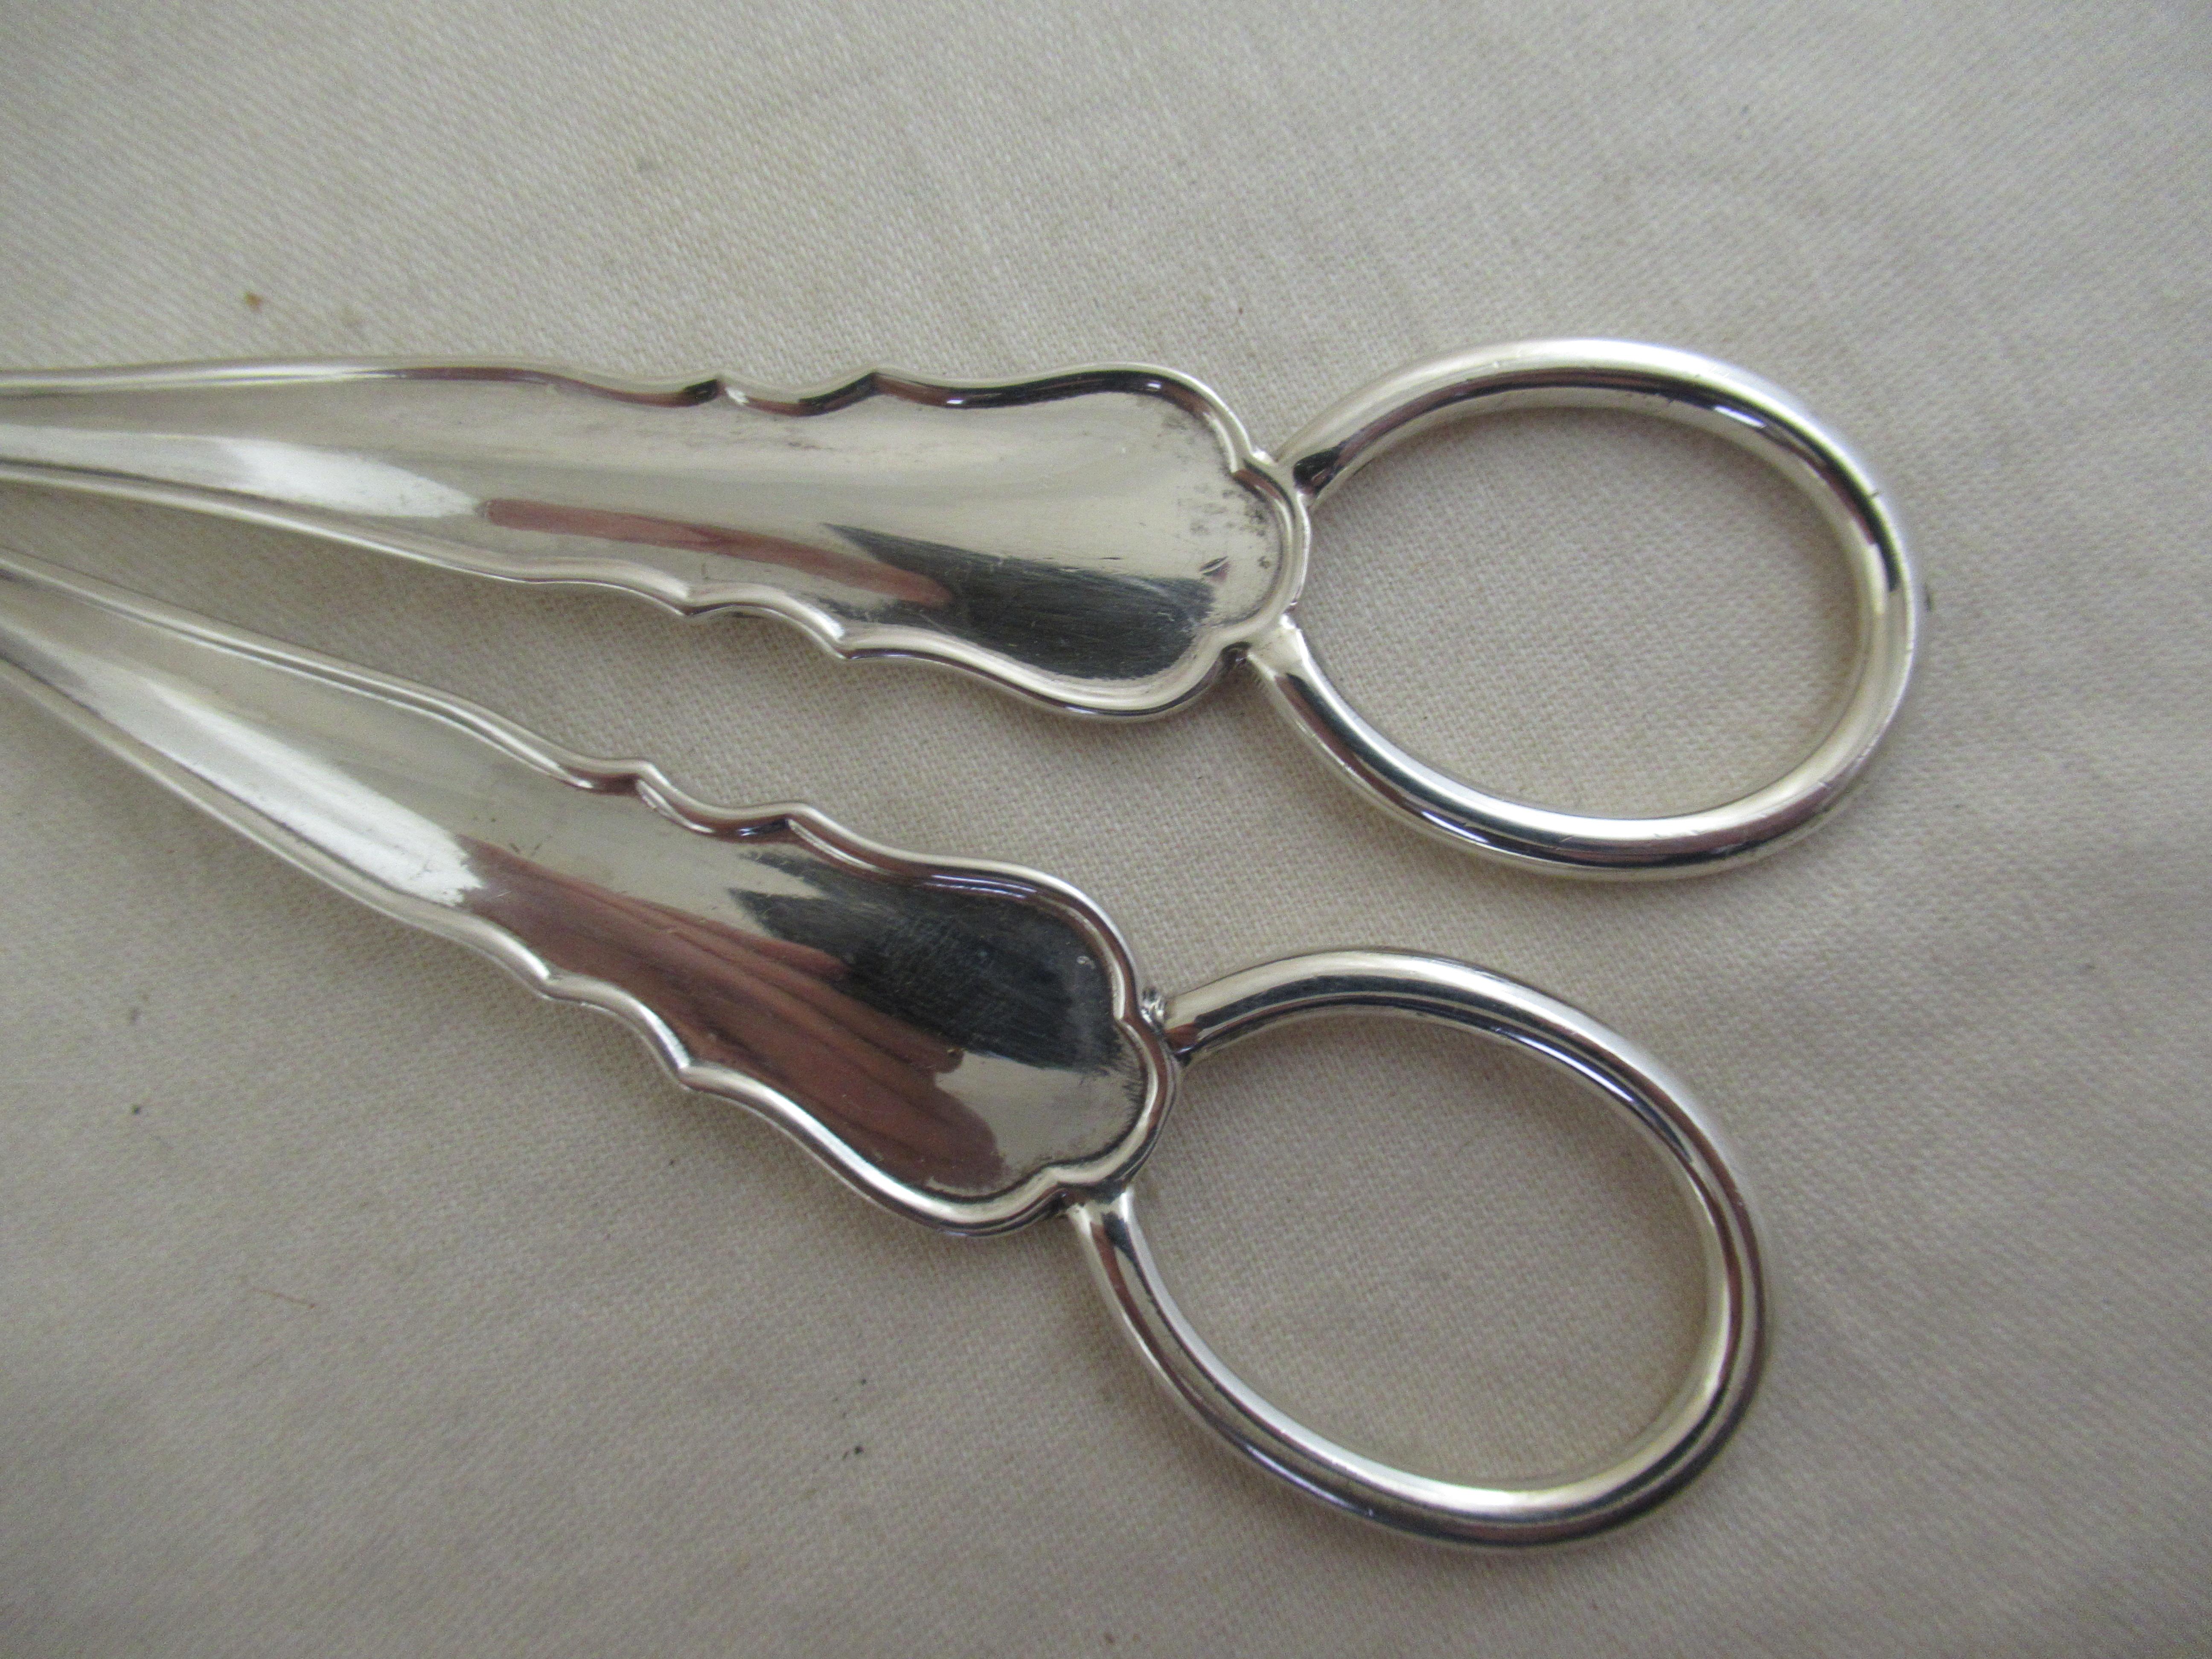 A superb pair of Grape Scissors or shears, made in a variation of  Kings shape. Distinctly raised border, giving extra strength - very sturdy and well made.
Used to cut a bunch of grapes from the vine, but also to grip the cut stem so that the bunch